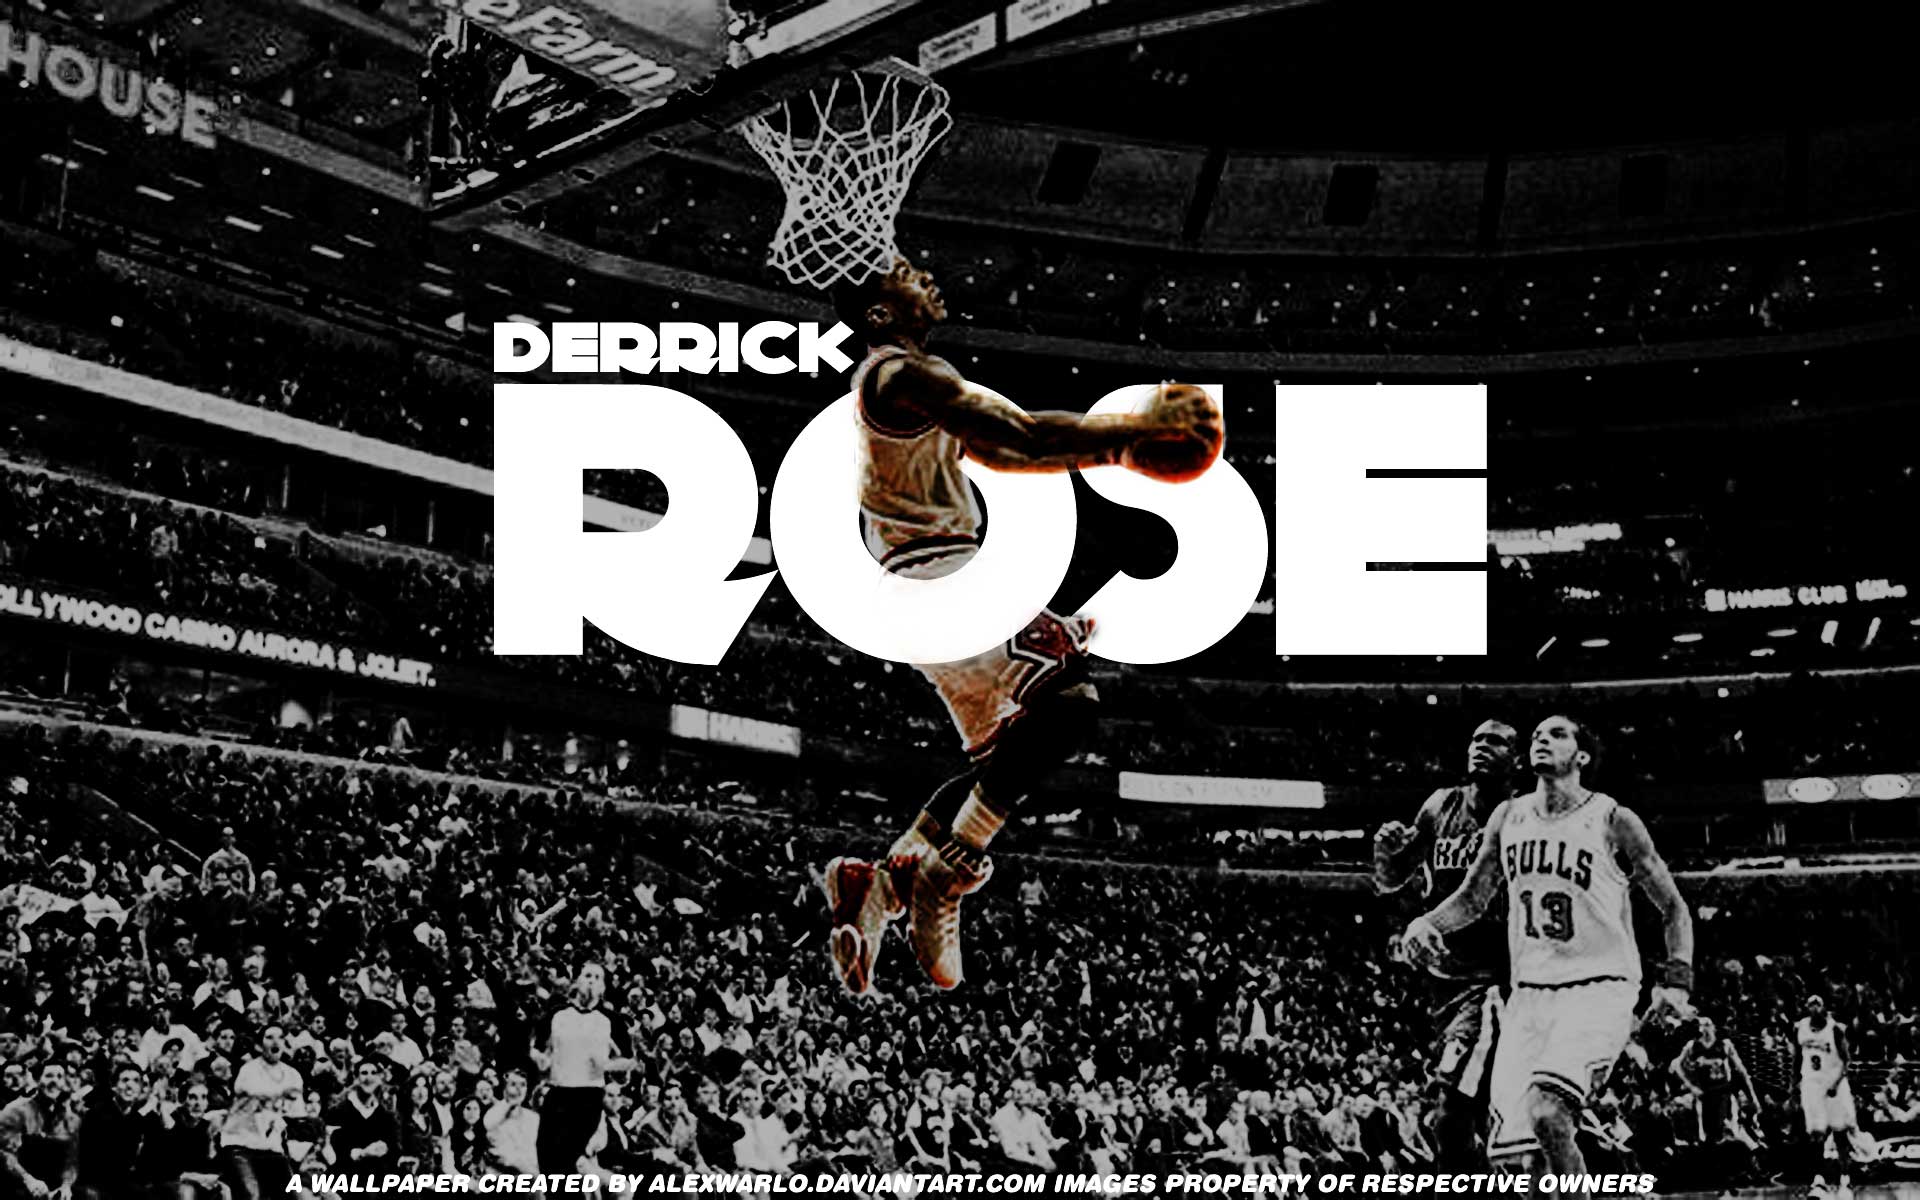 Derrick Rose Wallpapers High Resolution and Quality Download 1920x1200